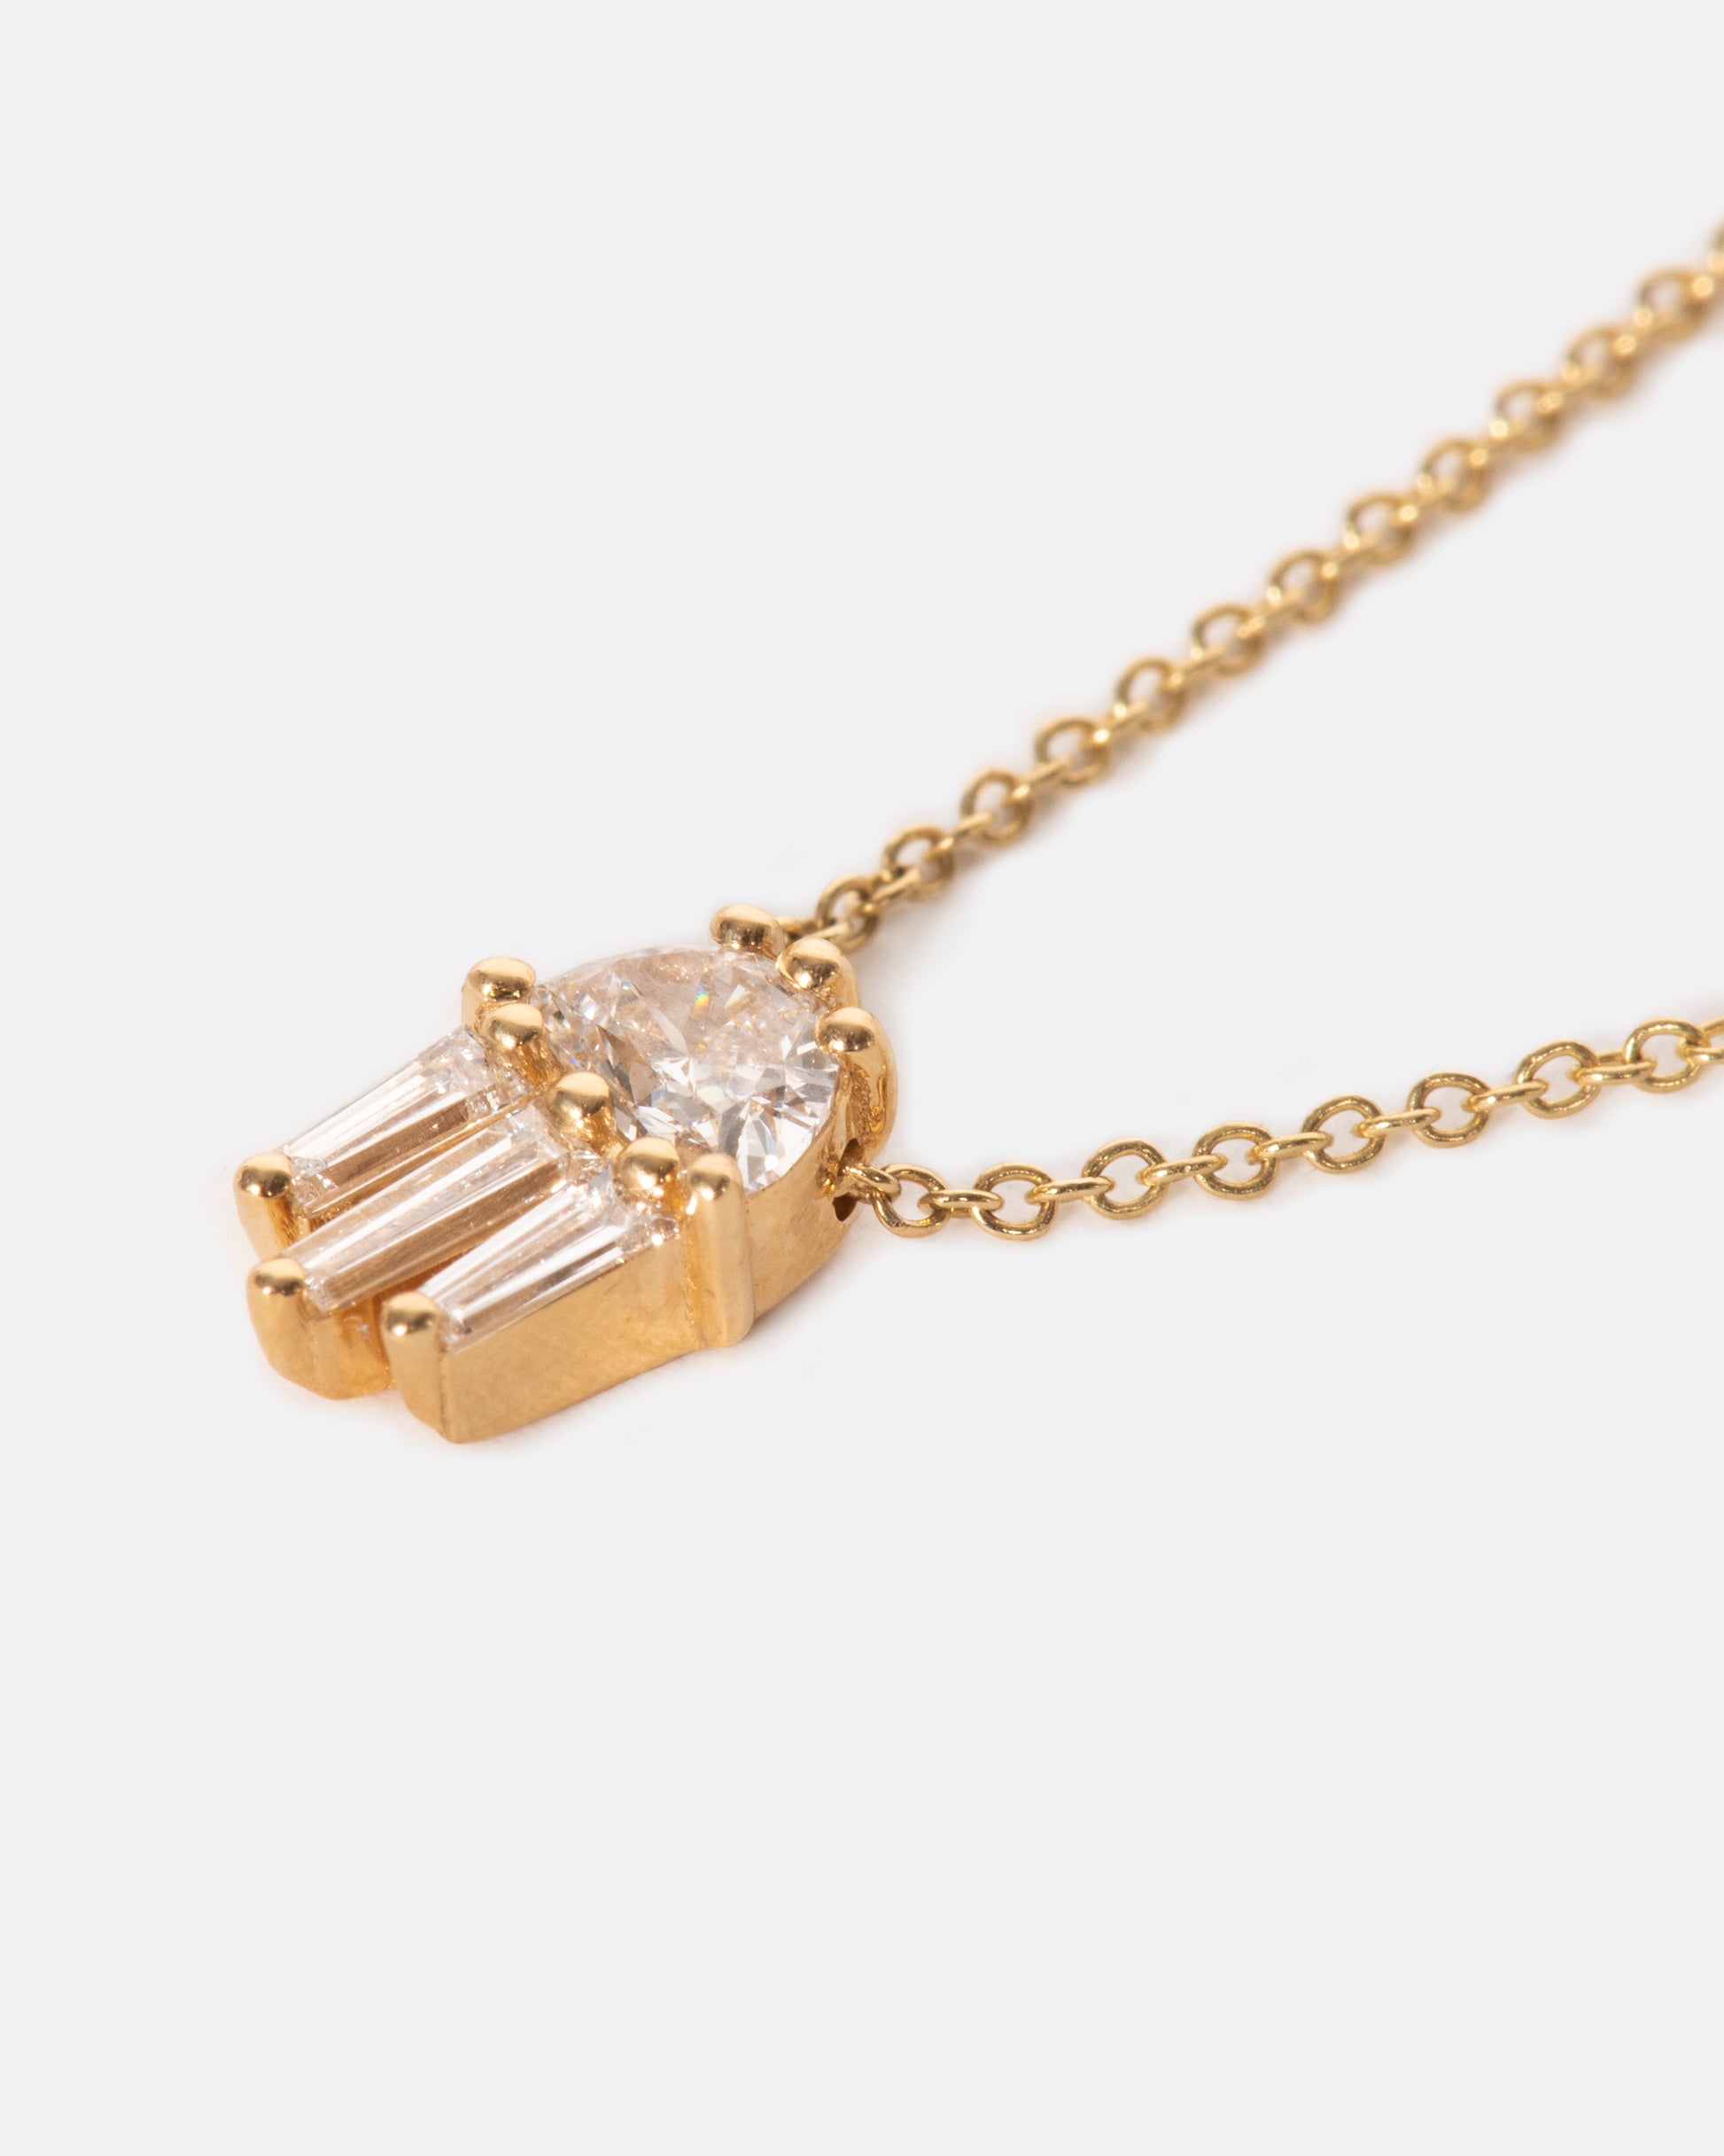 A diamond pendant necklace with a half moon and three tapered baguette diamonds.